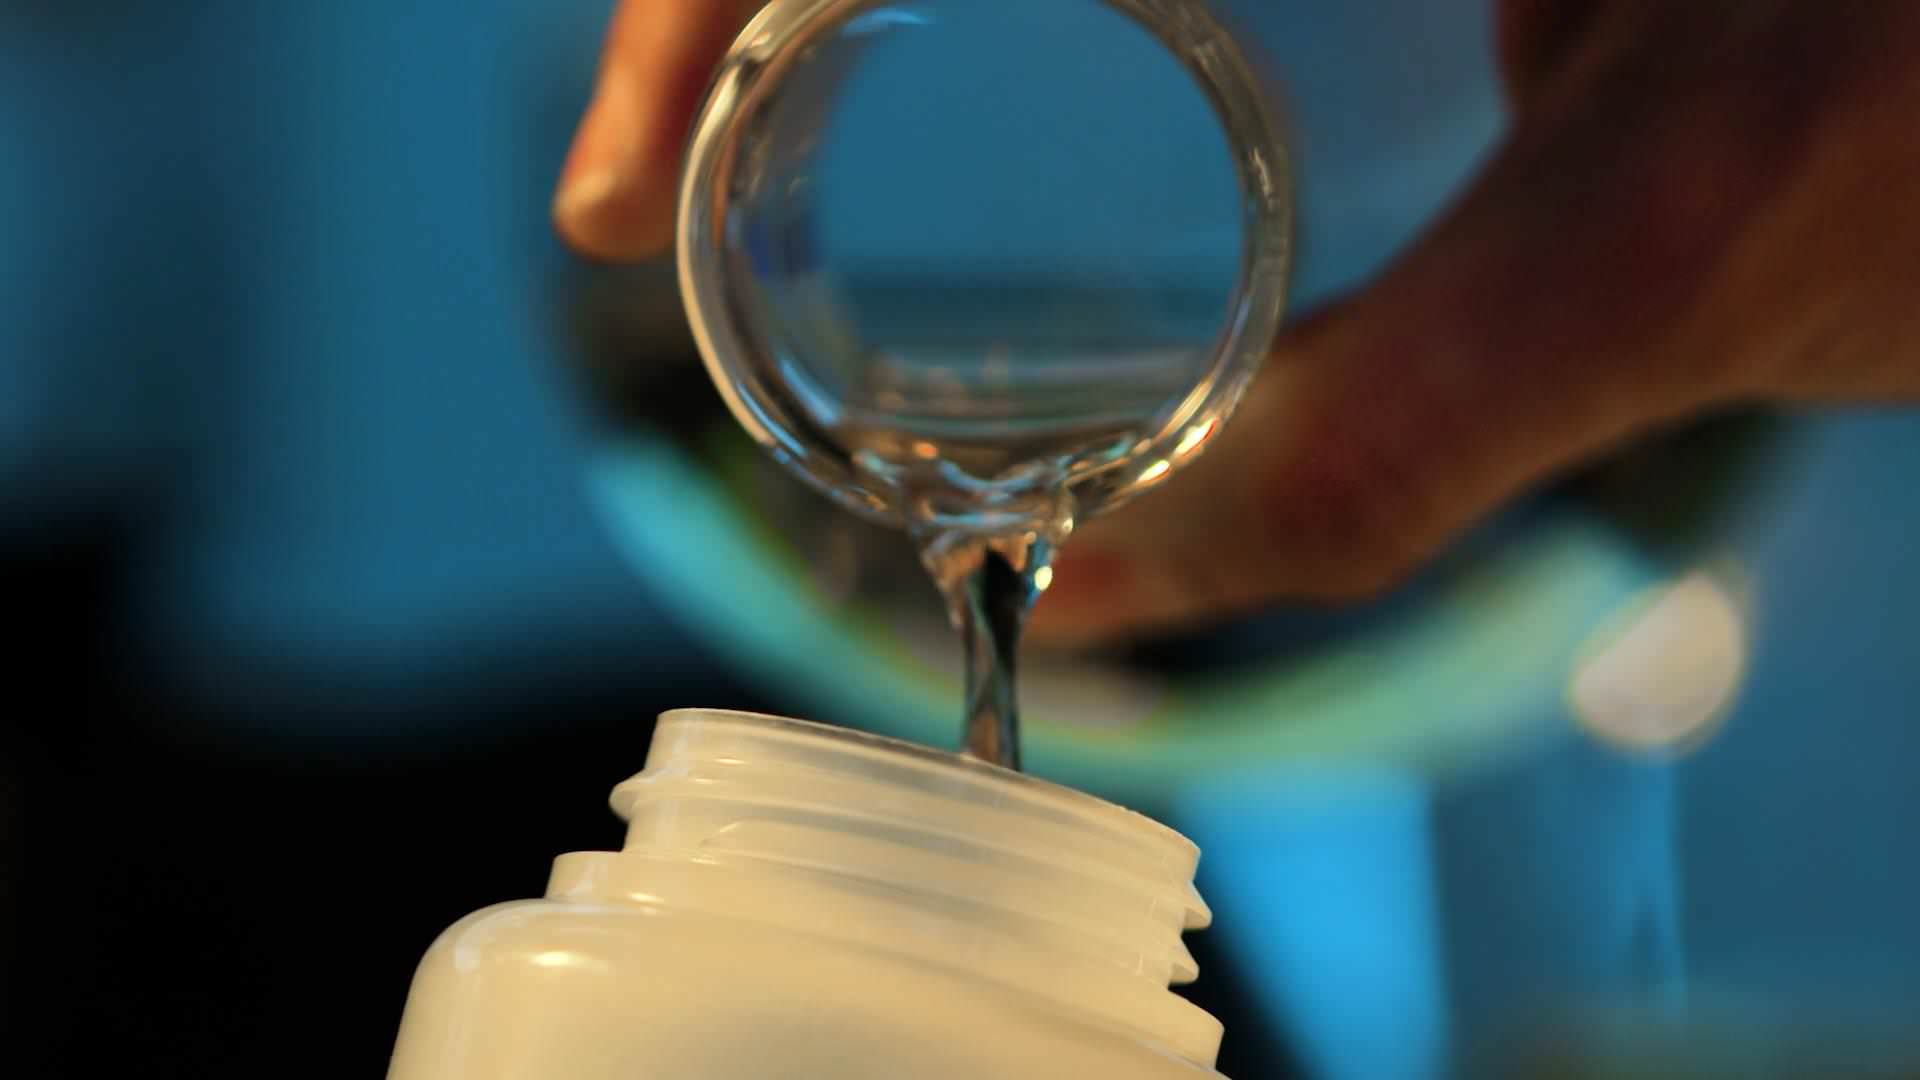 This image shows the pouring of fluid in a bottle for Magic Bullet film